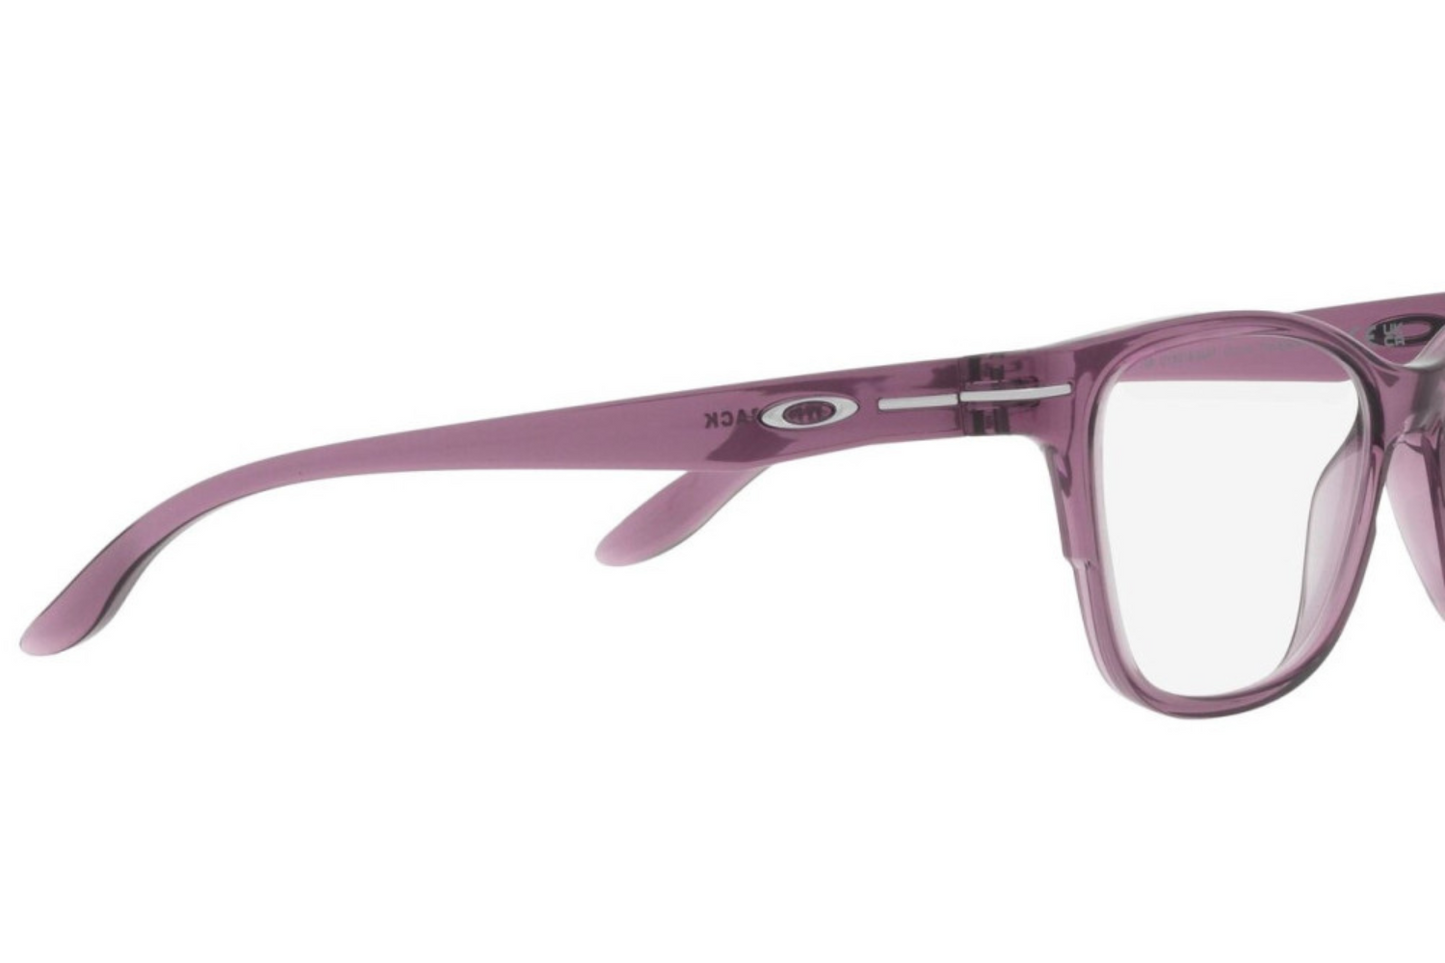 OAKLEY Frame YOUNG WHIPBACK OX8016 05